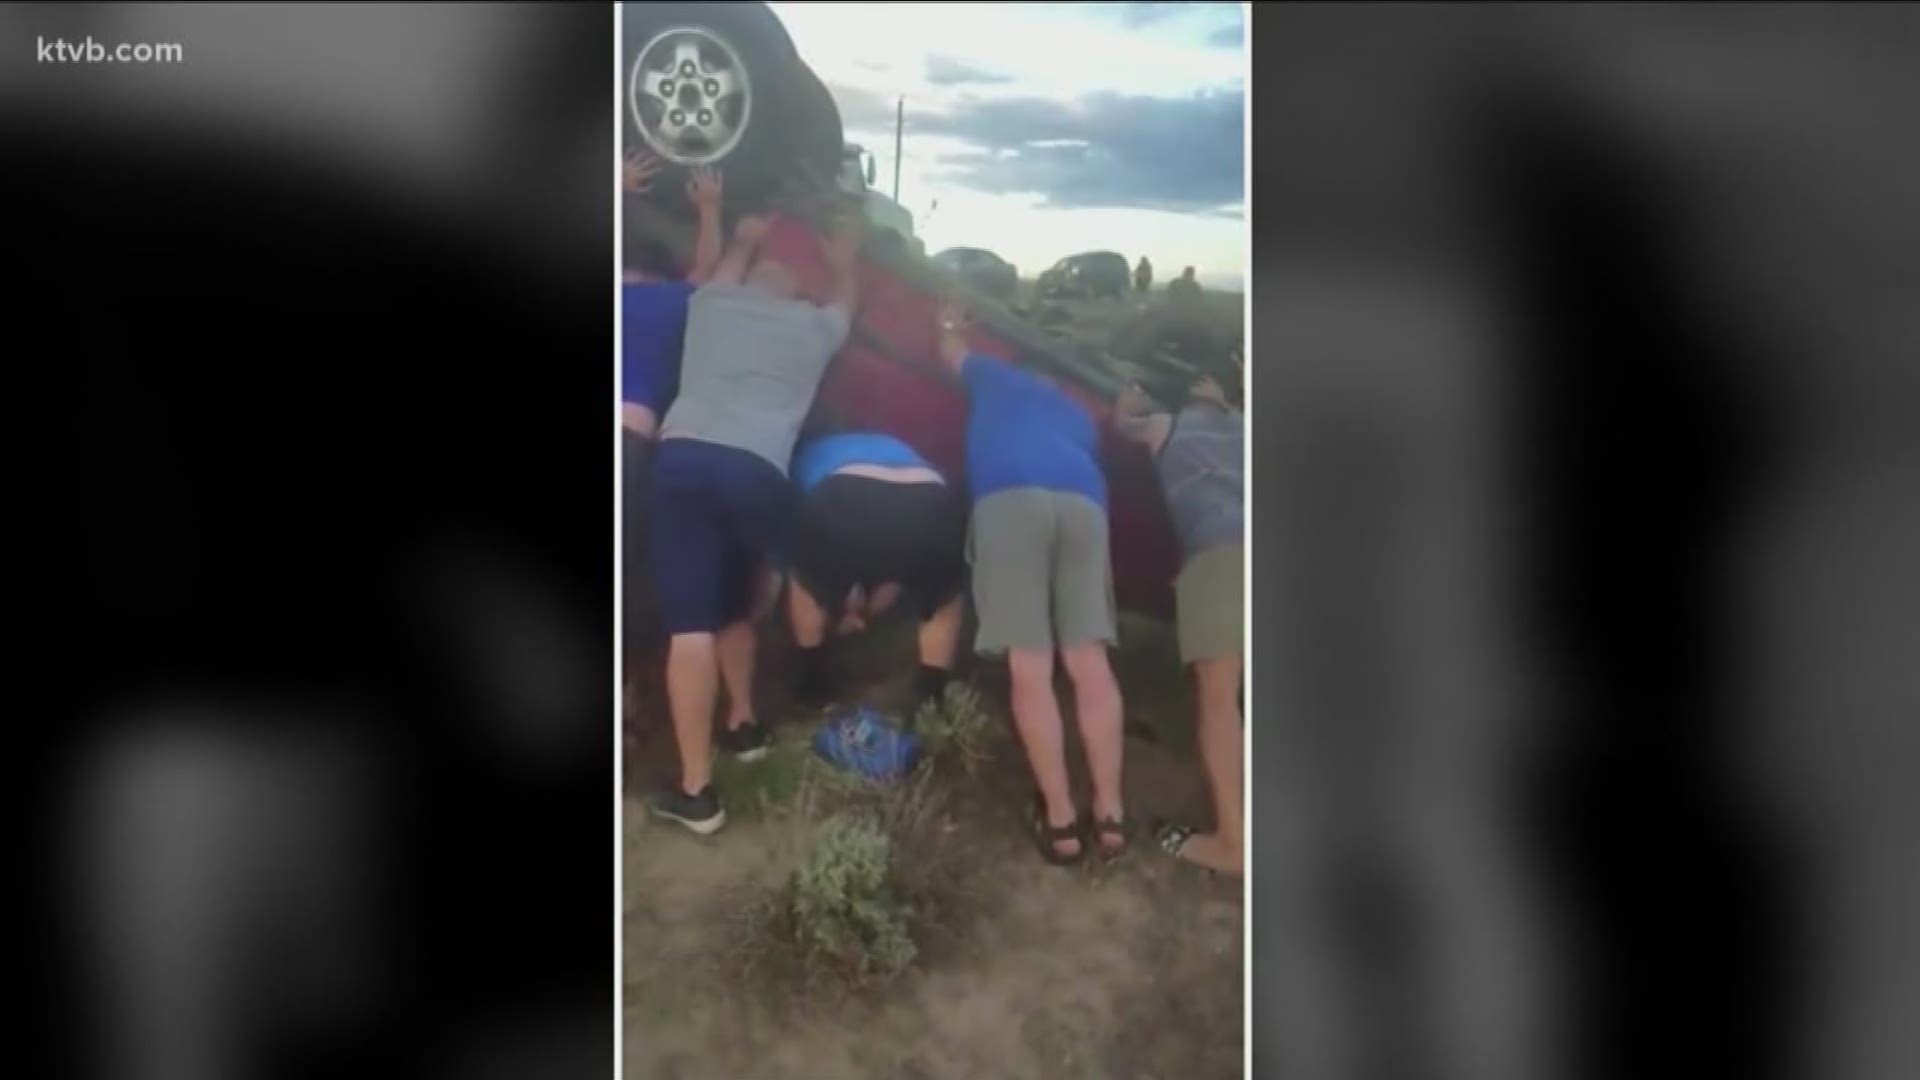 The team was able to lift the car to get the woman out.